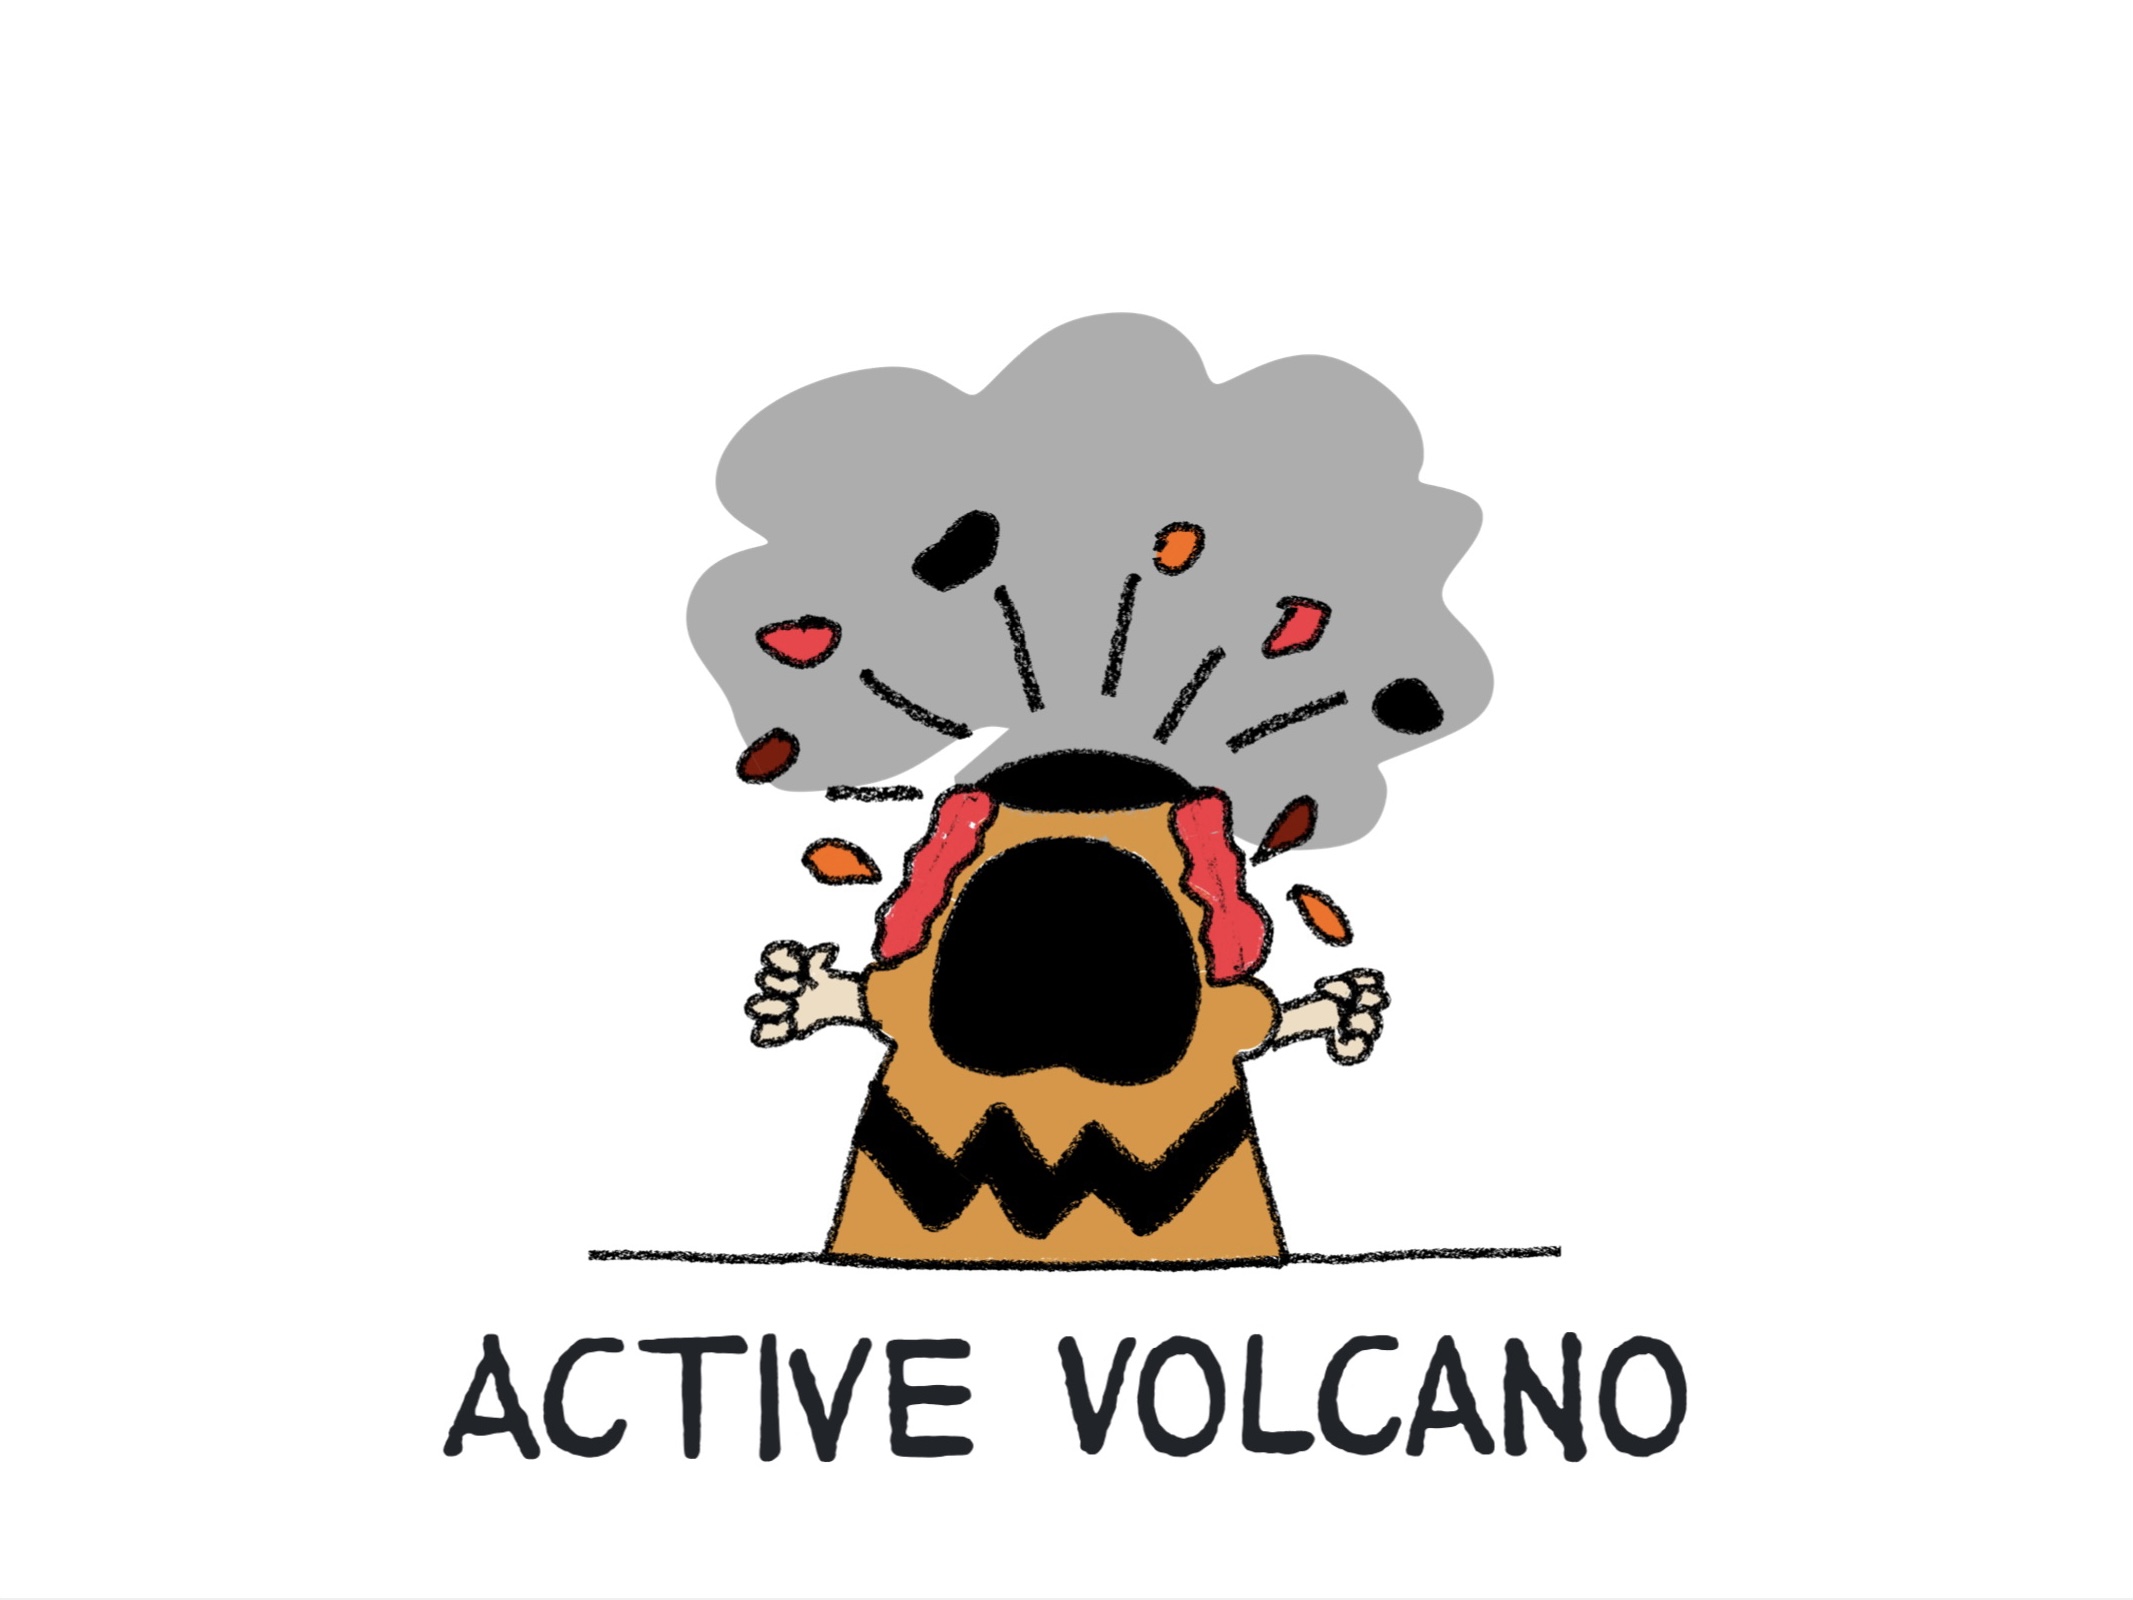 A cartoon active volcano, drawn in the style of the Peanuts TV show with Apple Pencil on iPad.